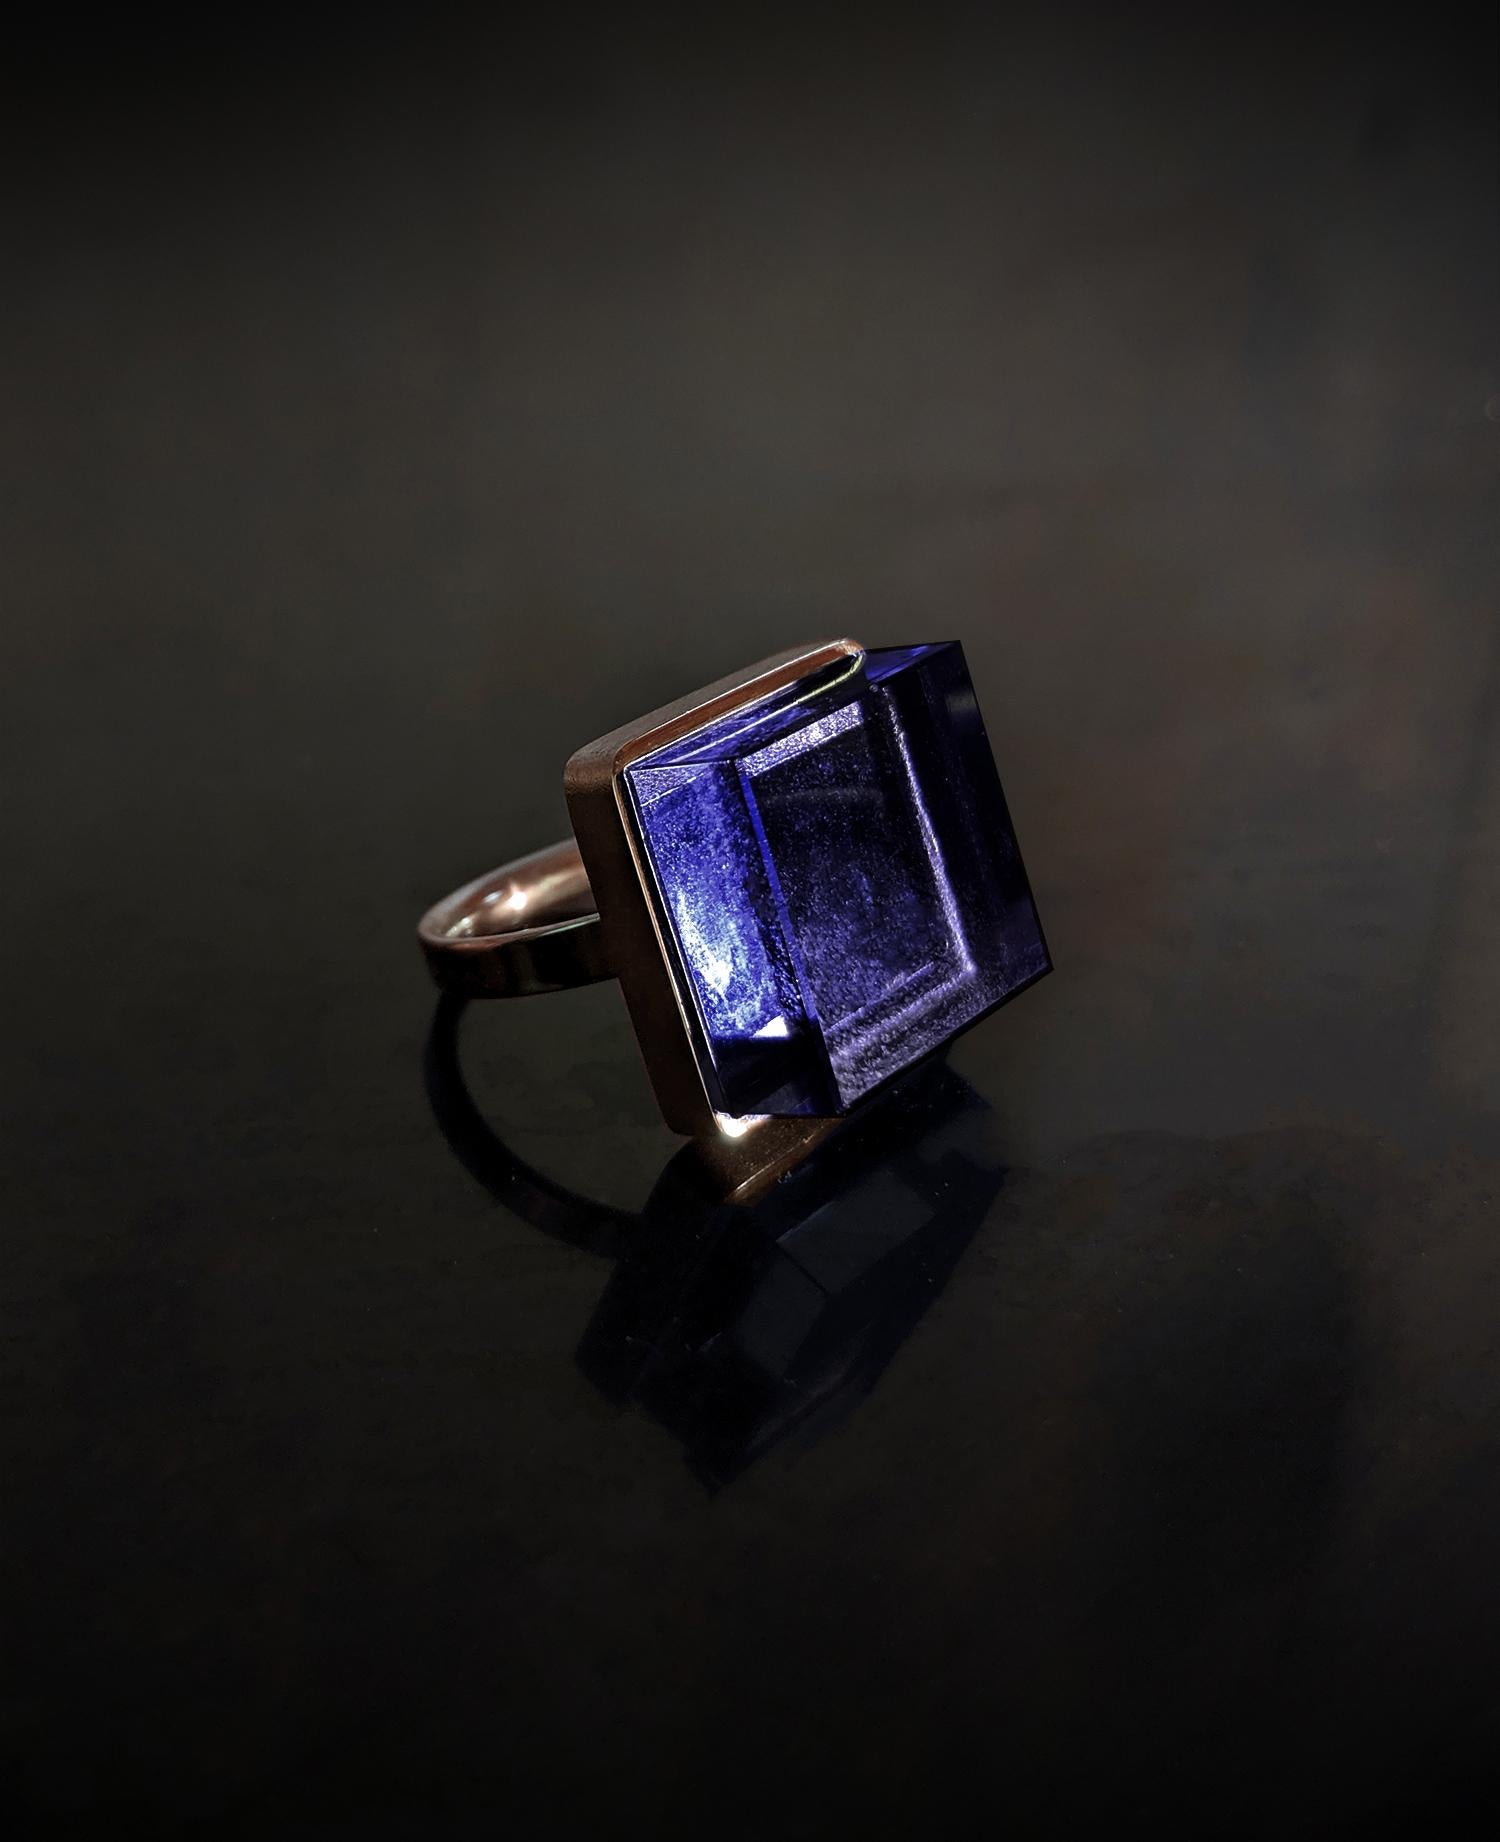 18 Karat Rose Gold Art Deco Style Ring with Amethyst, Featured in Vogue 1